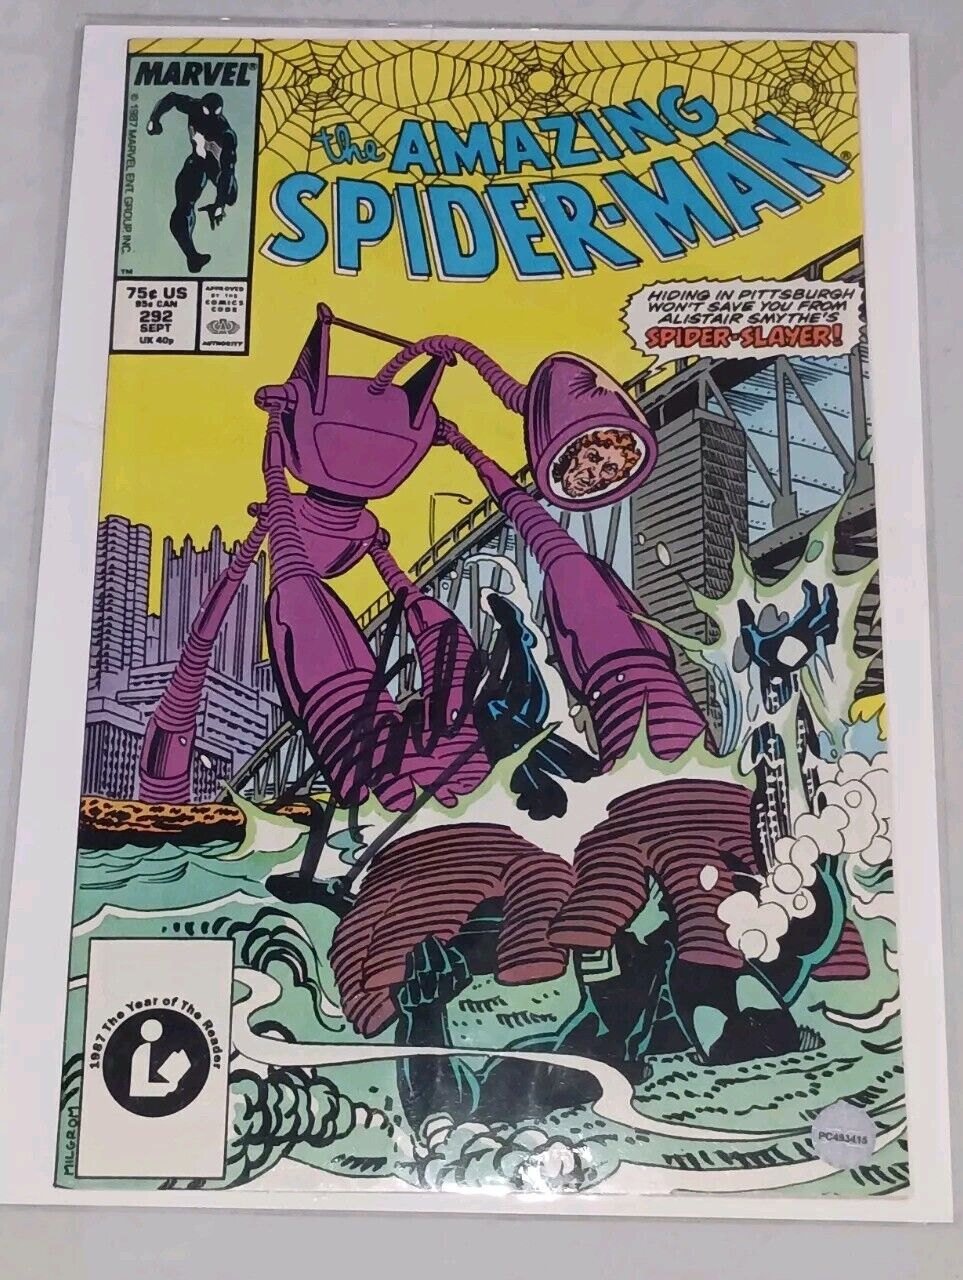 Marvel-The Amazing Spiderman #292 (1987) Signed By Stan Lee W/ COA 